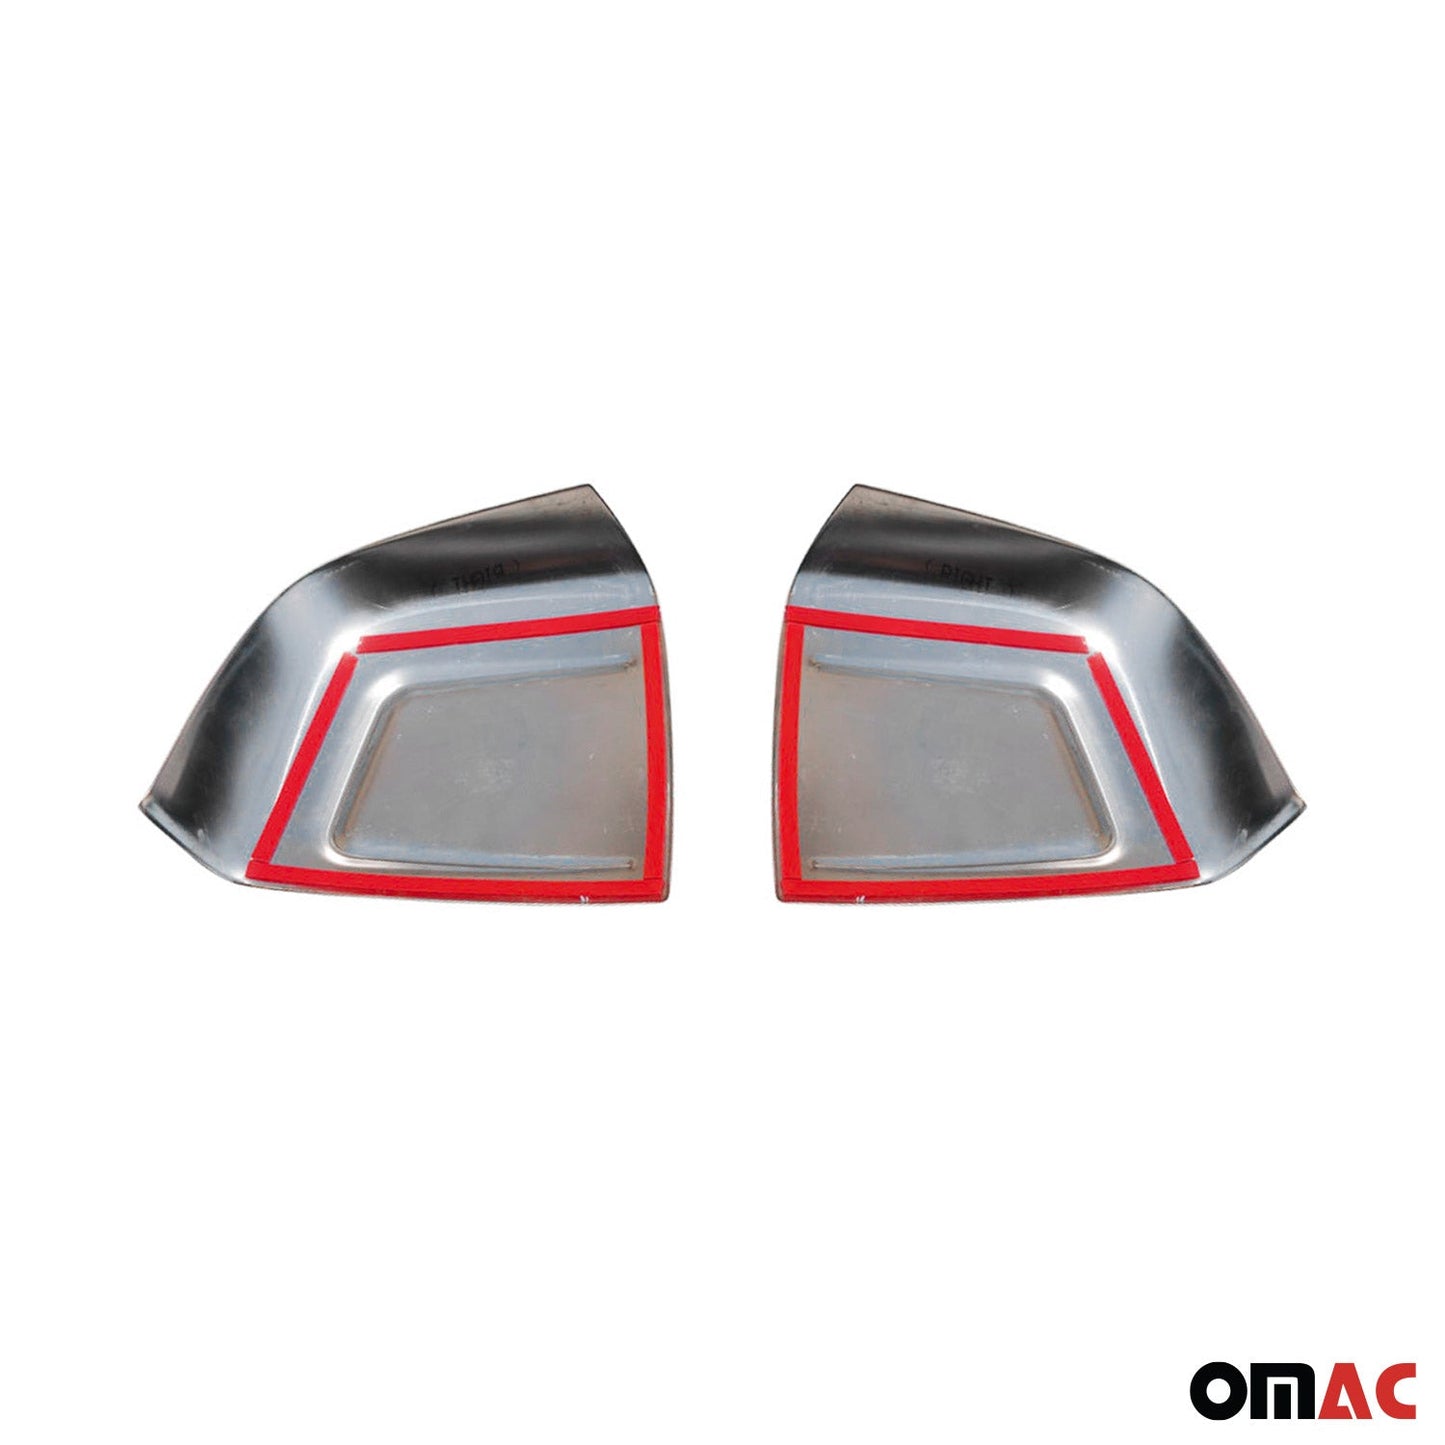 OMAC Side Mirror Cover Caps Fits RAM ProMaster City 2015-2022 Steel Silver 2 Pcs 2524111